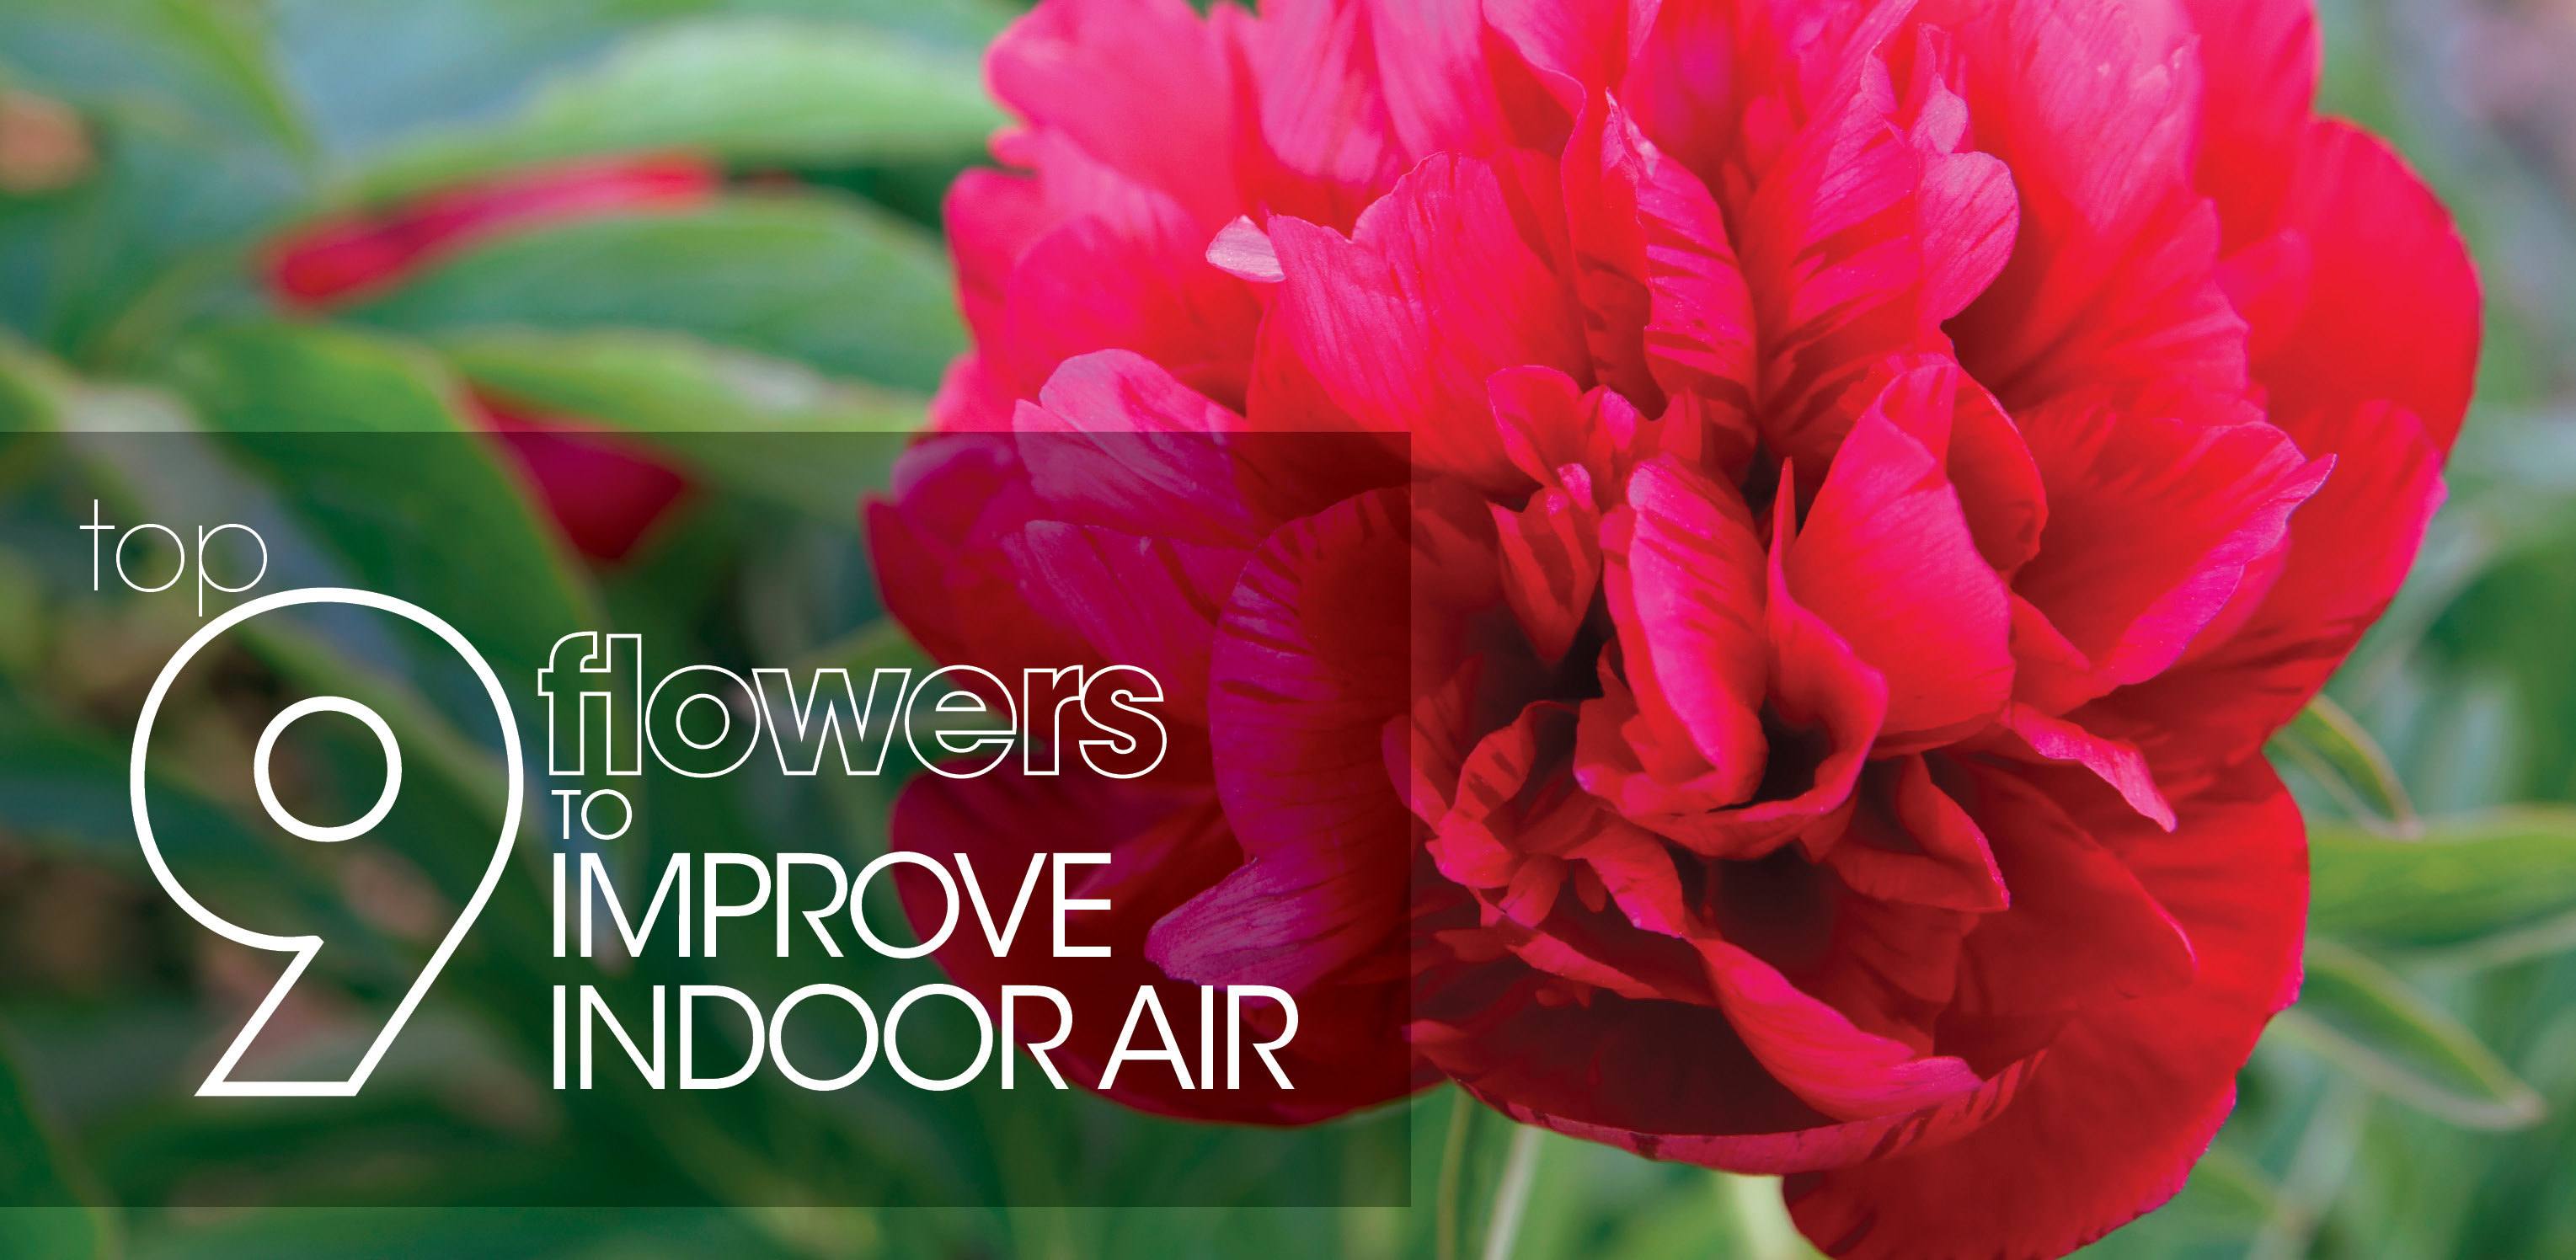 Red flower with text: "top 9 flowers to improve indoor air"